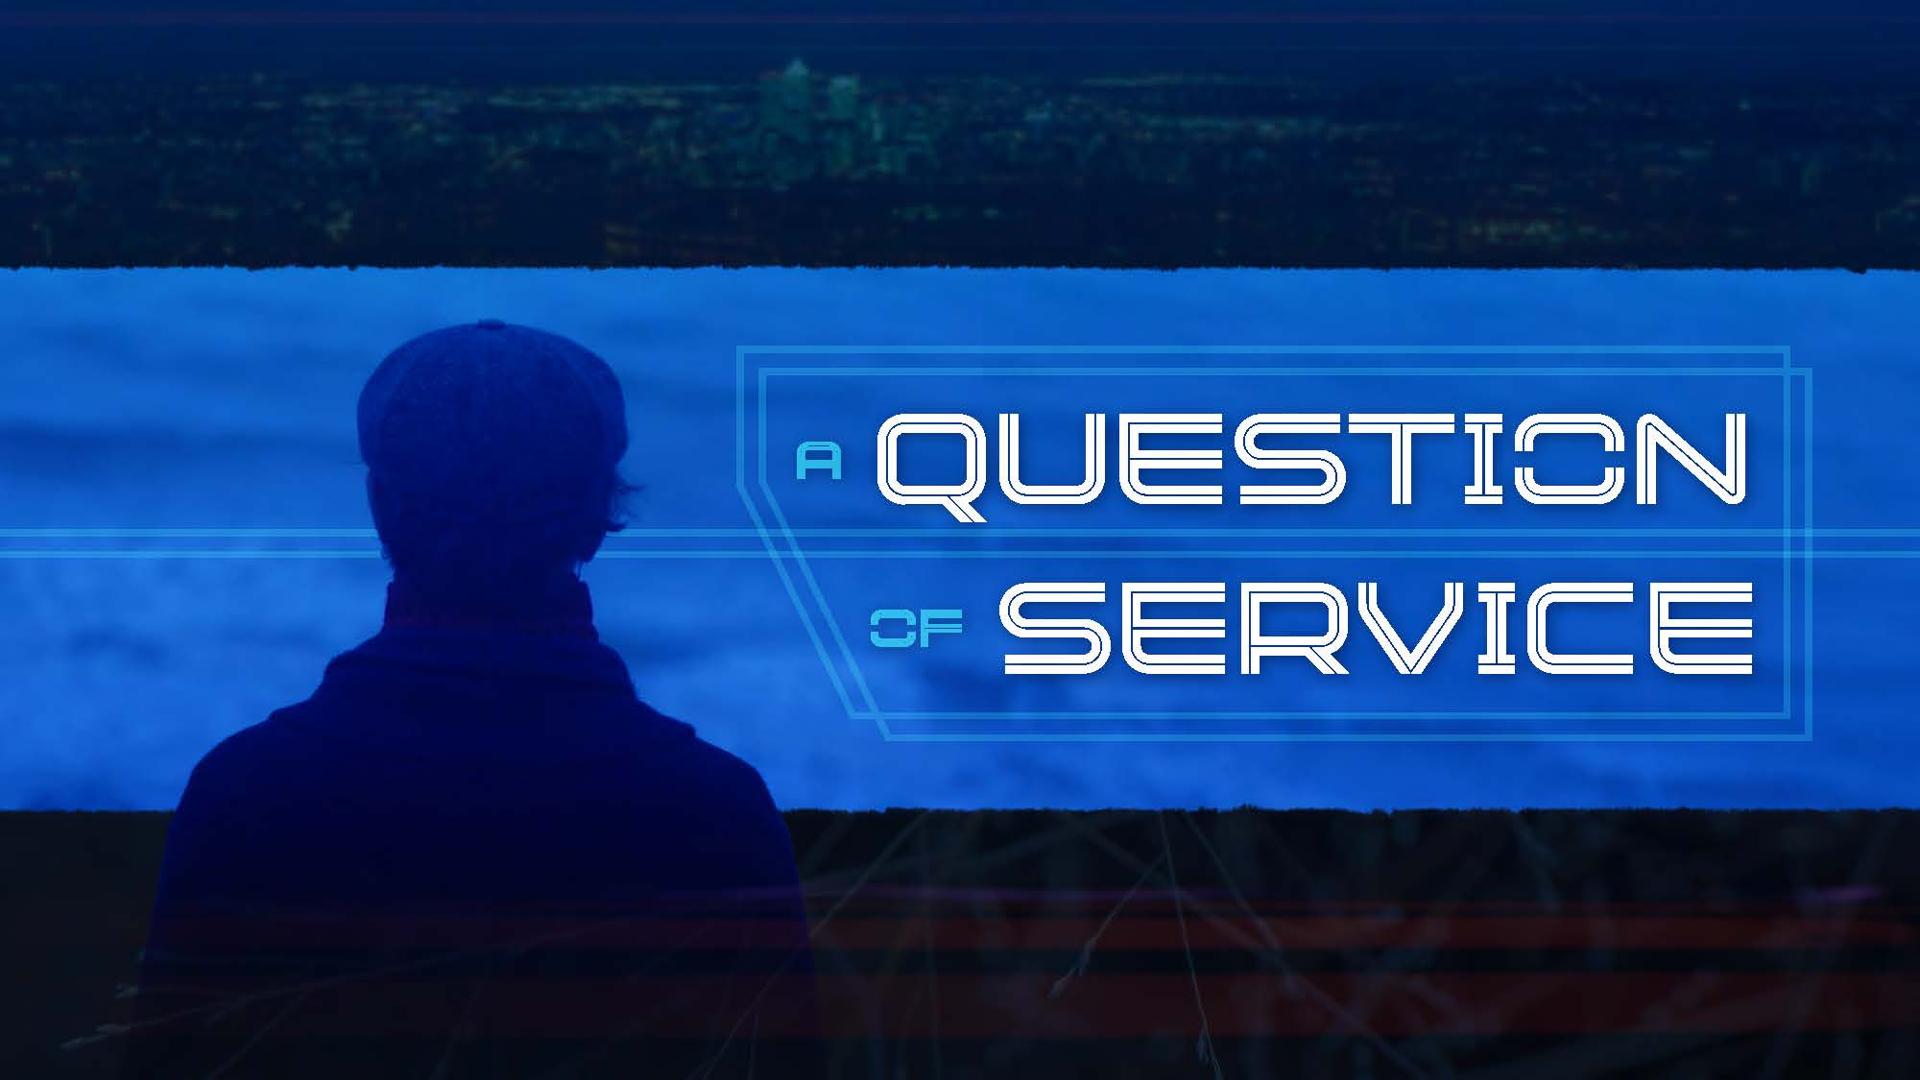 A Question of Service